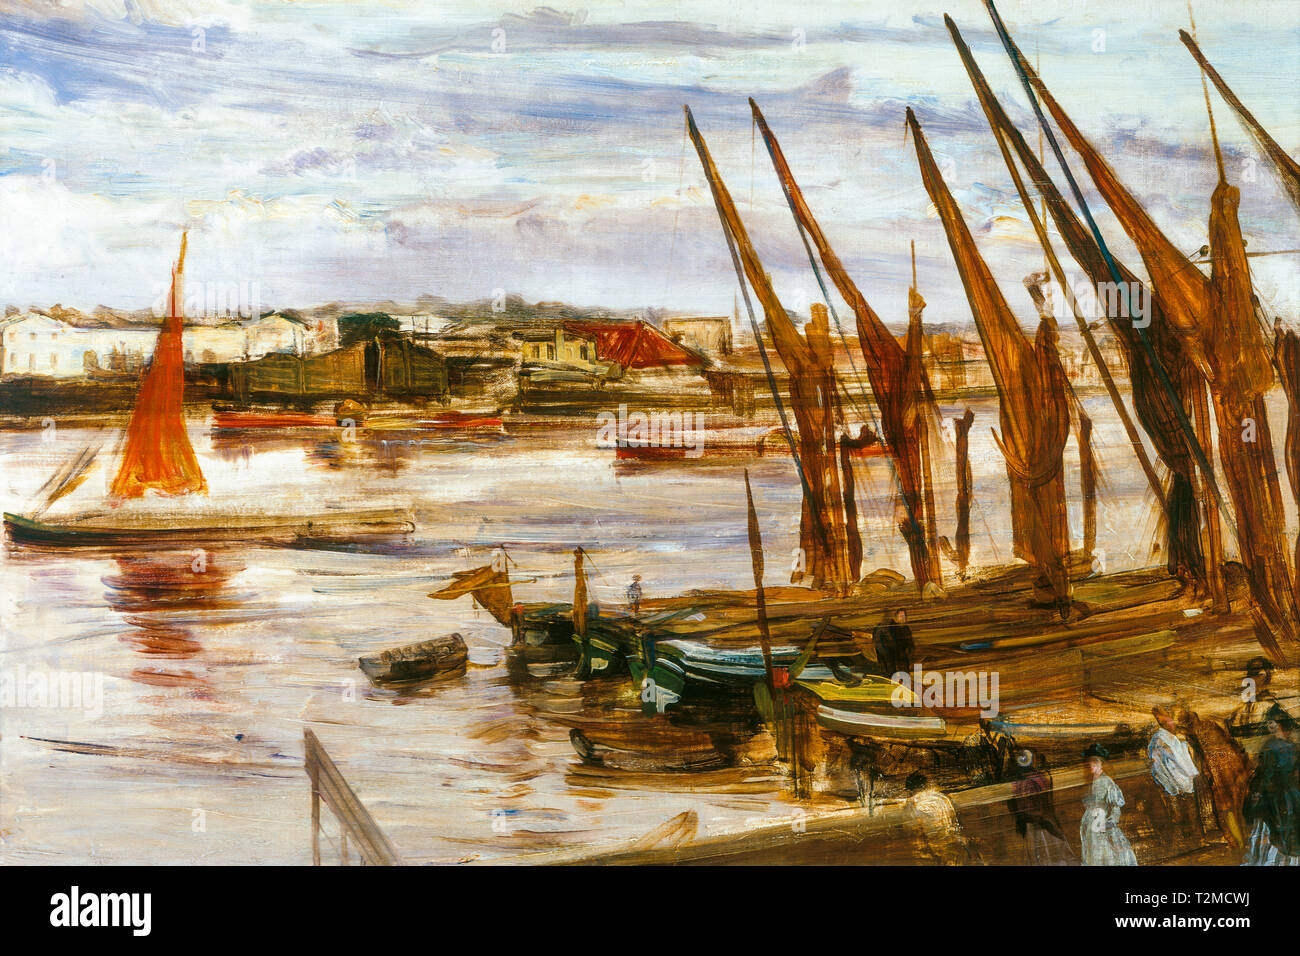 James McNeill Whistler, Battersea Reach, painting, c. 1863 Stock Photo